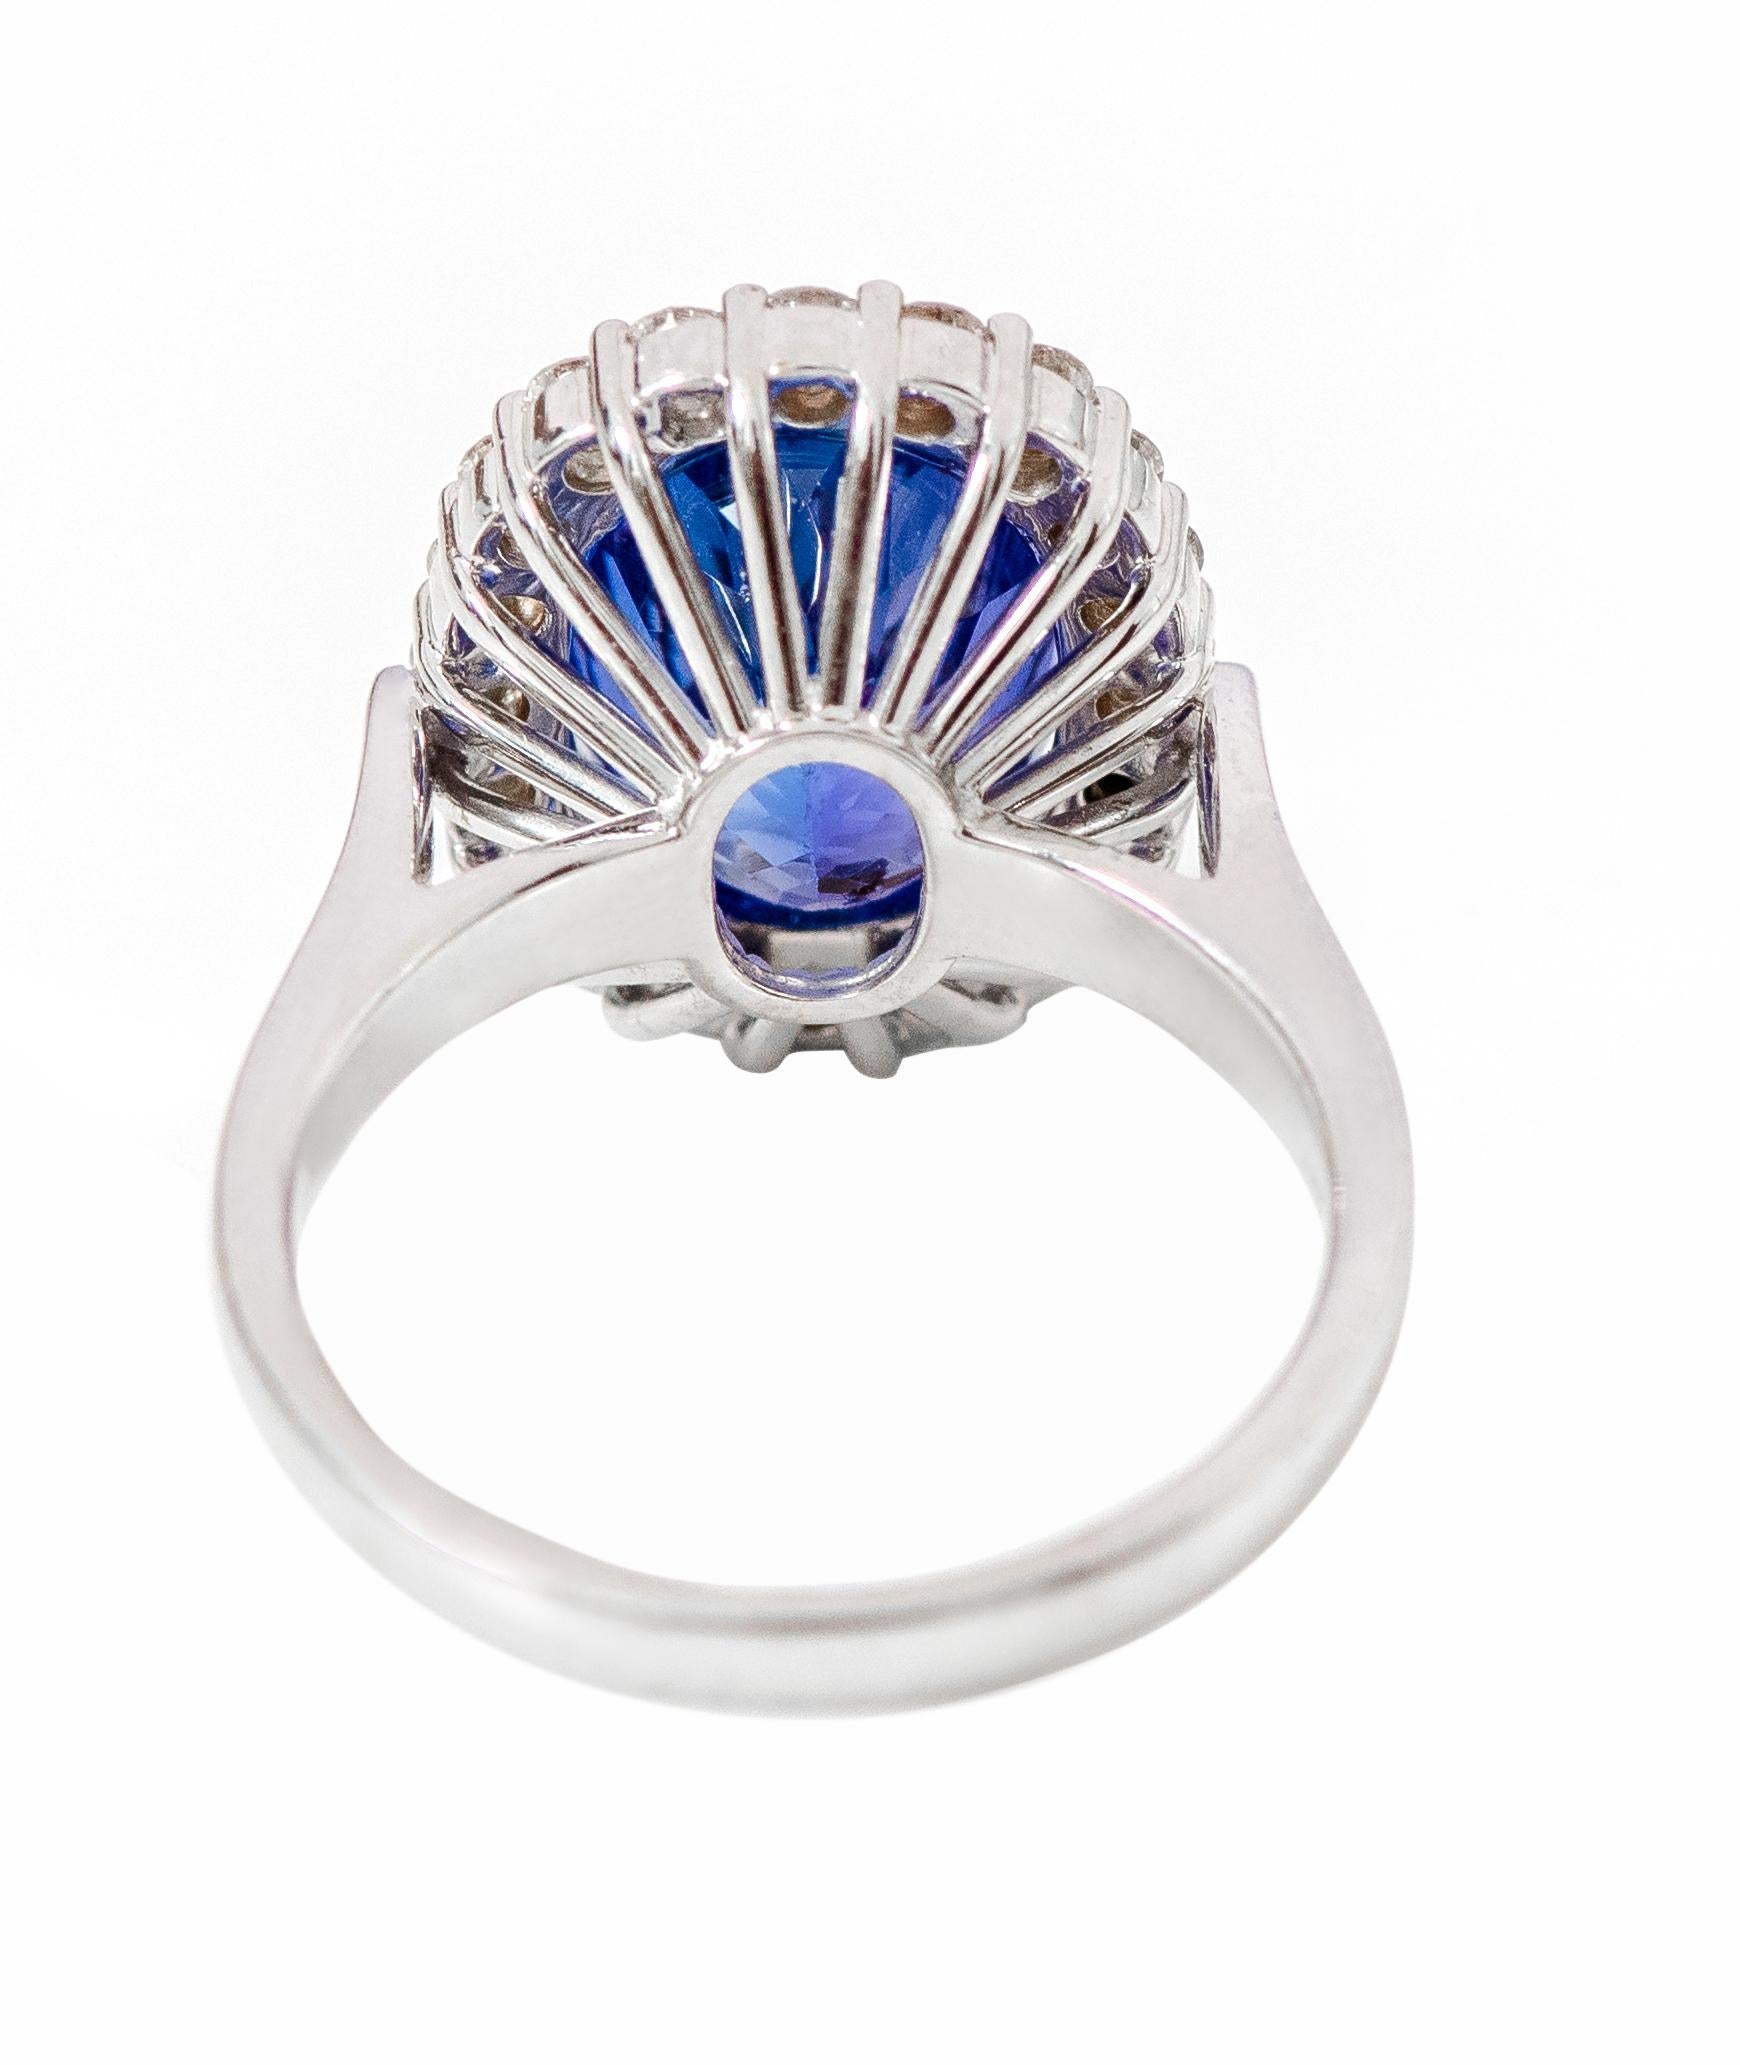 Women's 18 Karat White Gold 6.22 Carat Oval-Cut Tanzanite and Diamond Cluster Ring For Sale